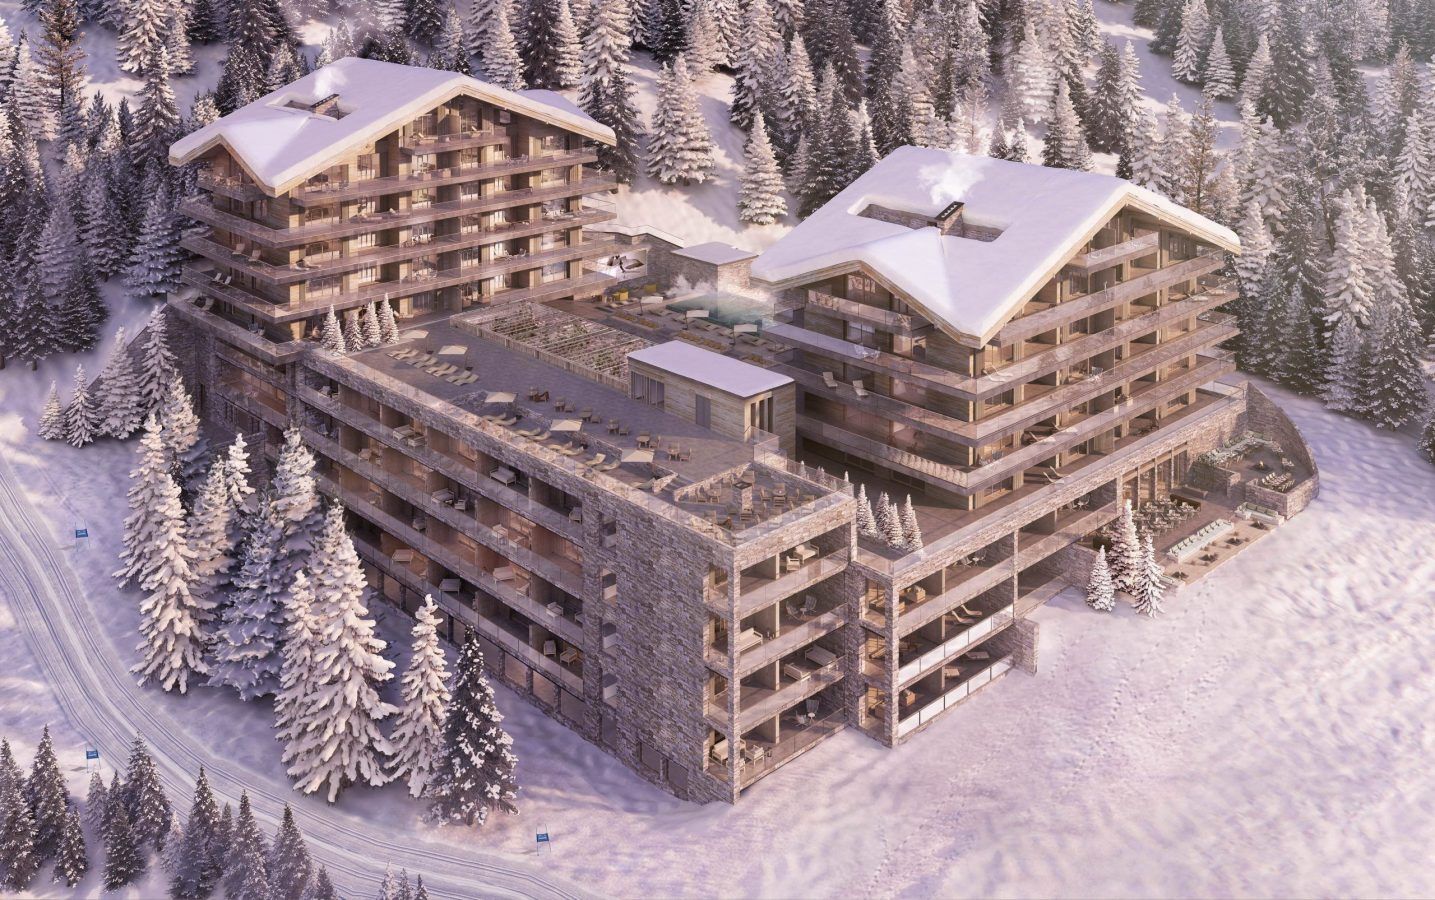 The Luxury Six Senses Crans-Montana Hotel and Spa Will be Opened in Switzerland This December